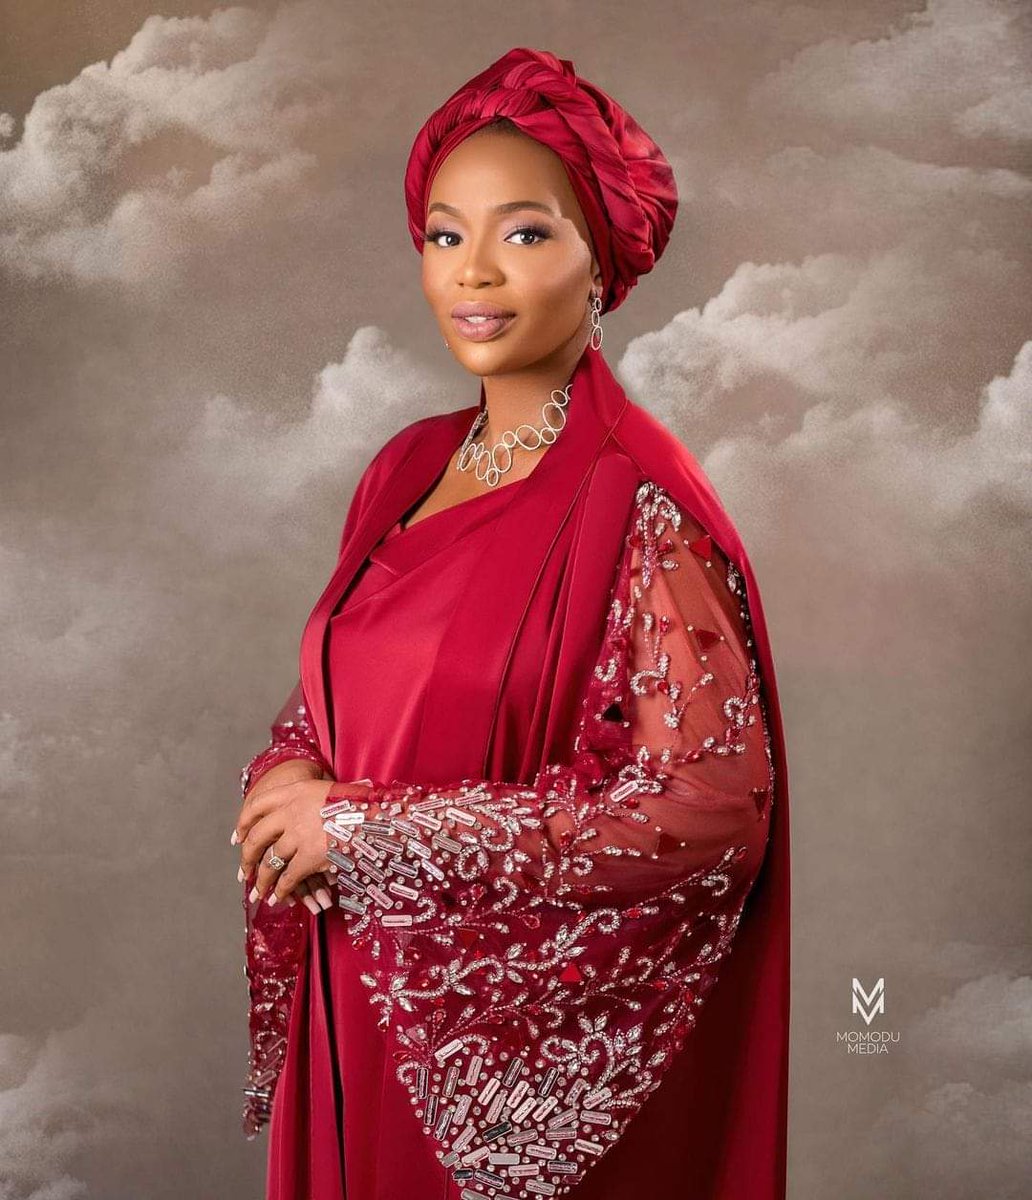 Oyo ojubi to Her Majesty, Olori Atuwatse III. 
May this year bring you continued joy, wisdom, and strength in your role as the Queen of Warri Kingdom. Your grace, compassion, and dedication to the Itsekiri people are an inspiration to all.